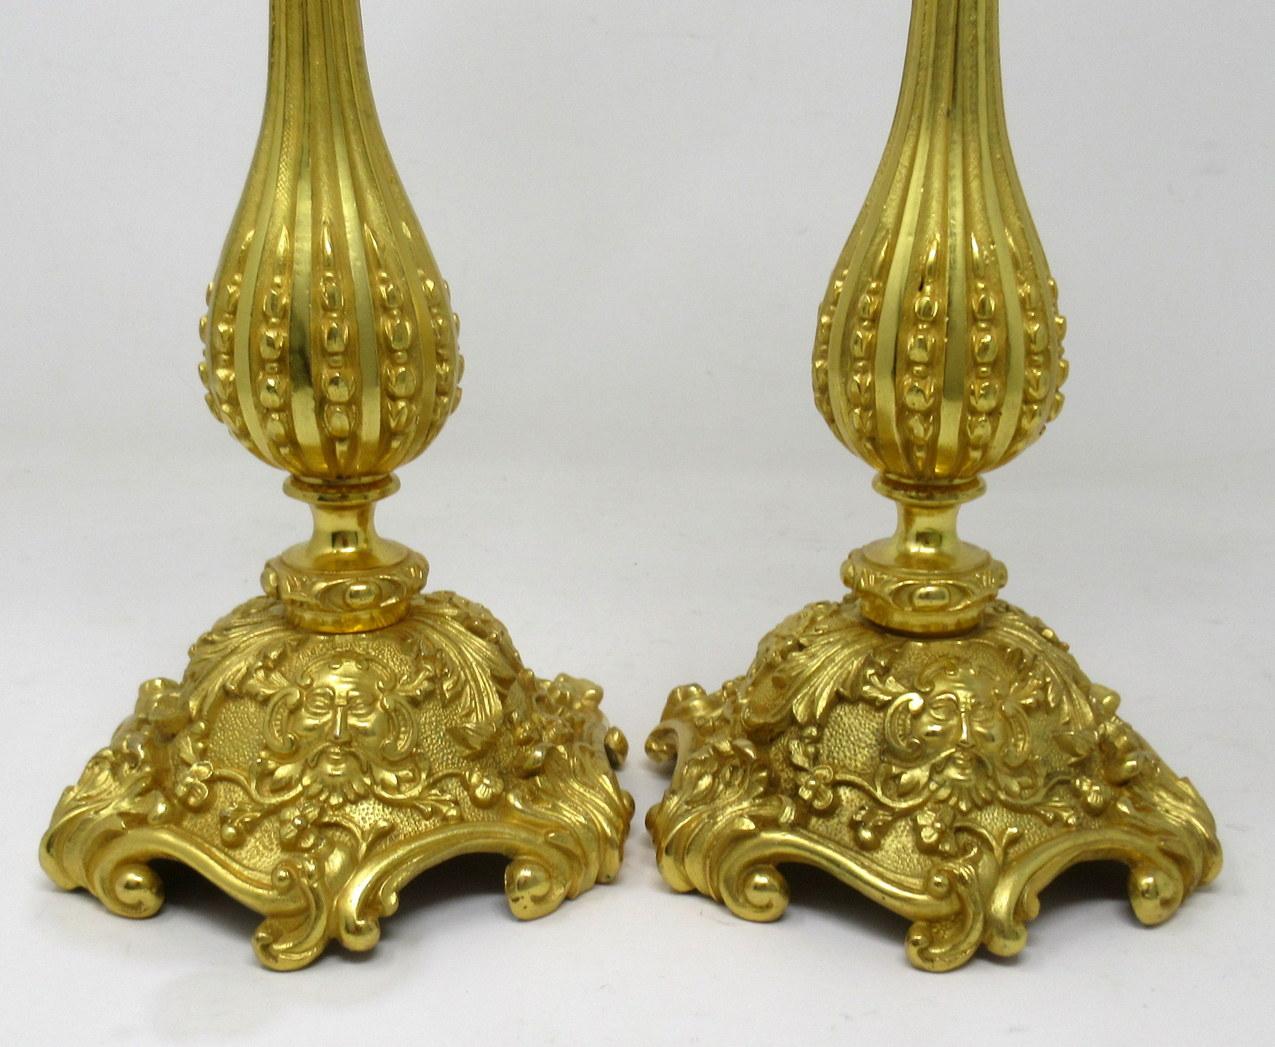 Antique Pair of French Doré Bronze Neoclassical Ormolu Gilt Candlestick Lamps 1